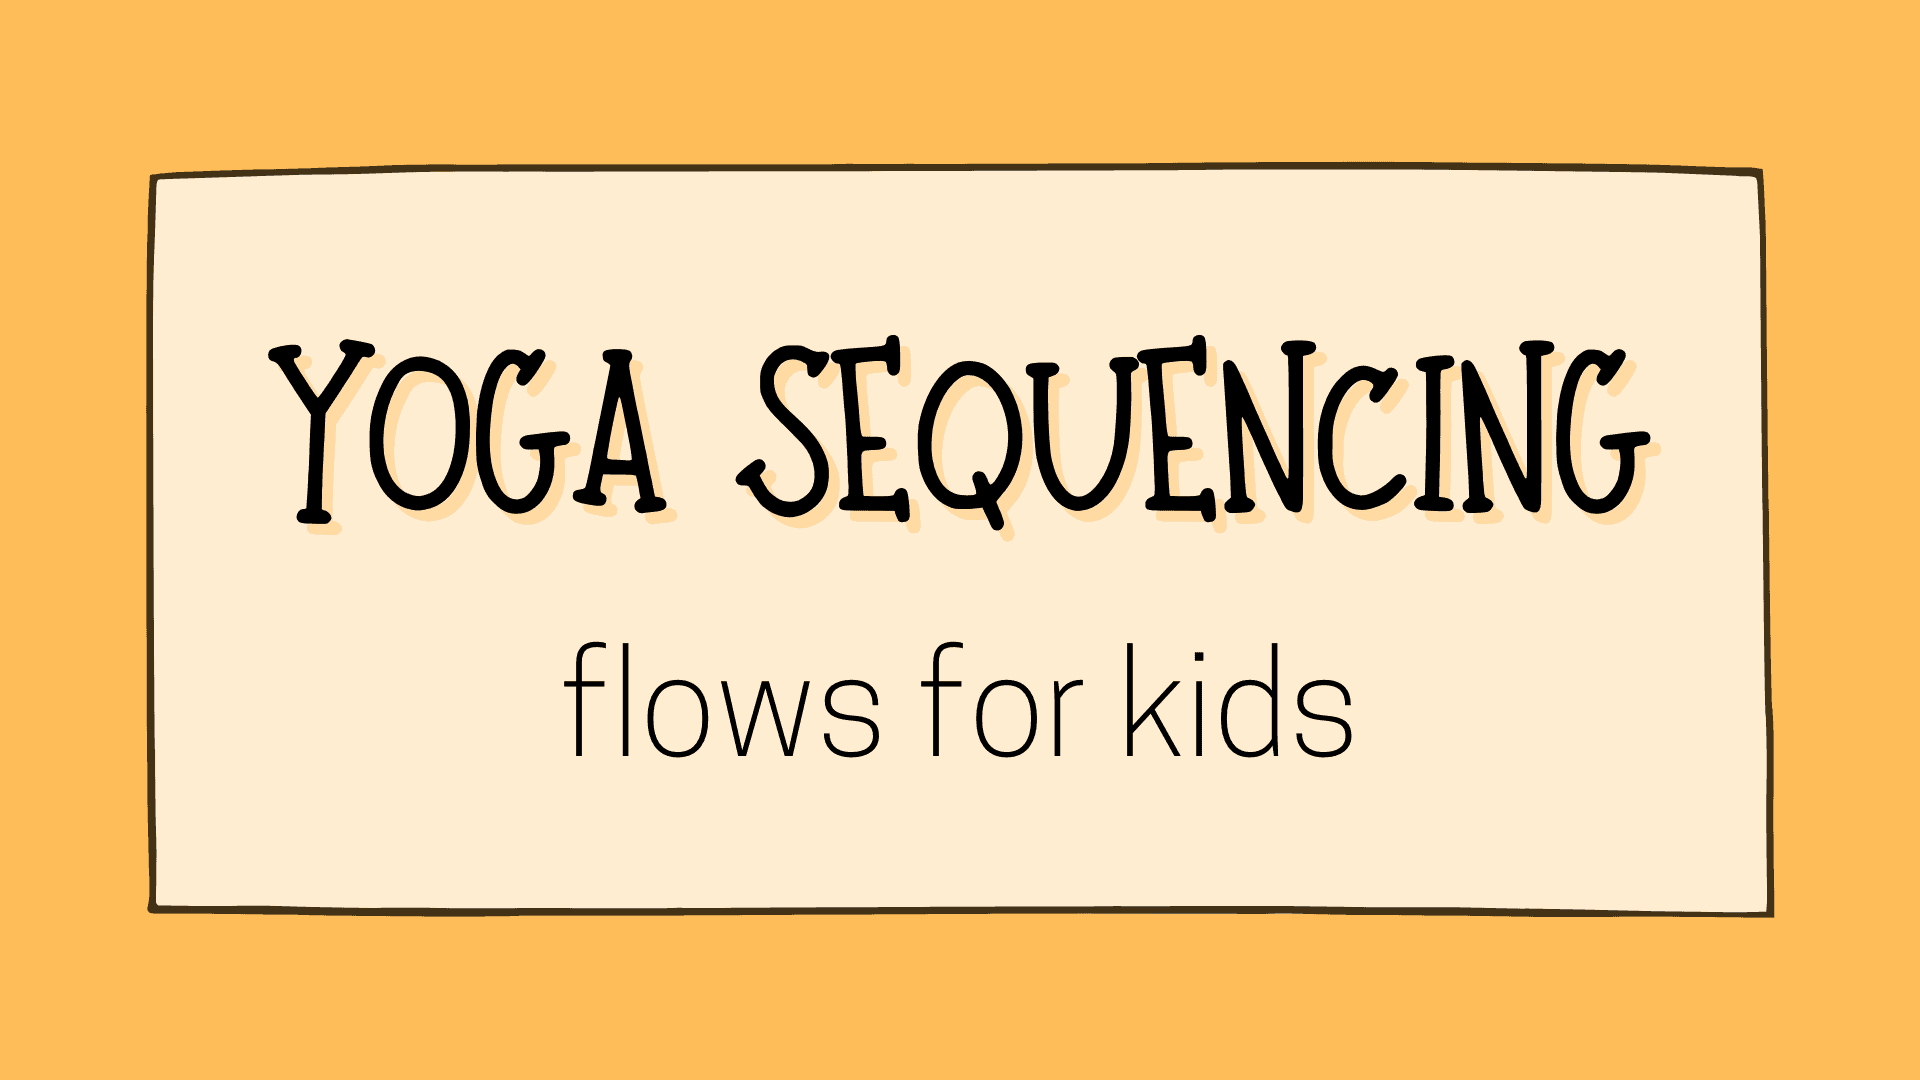 Yoga Sequencing and Flows for Kids Mini Course : Kumarah